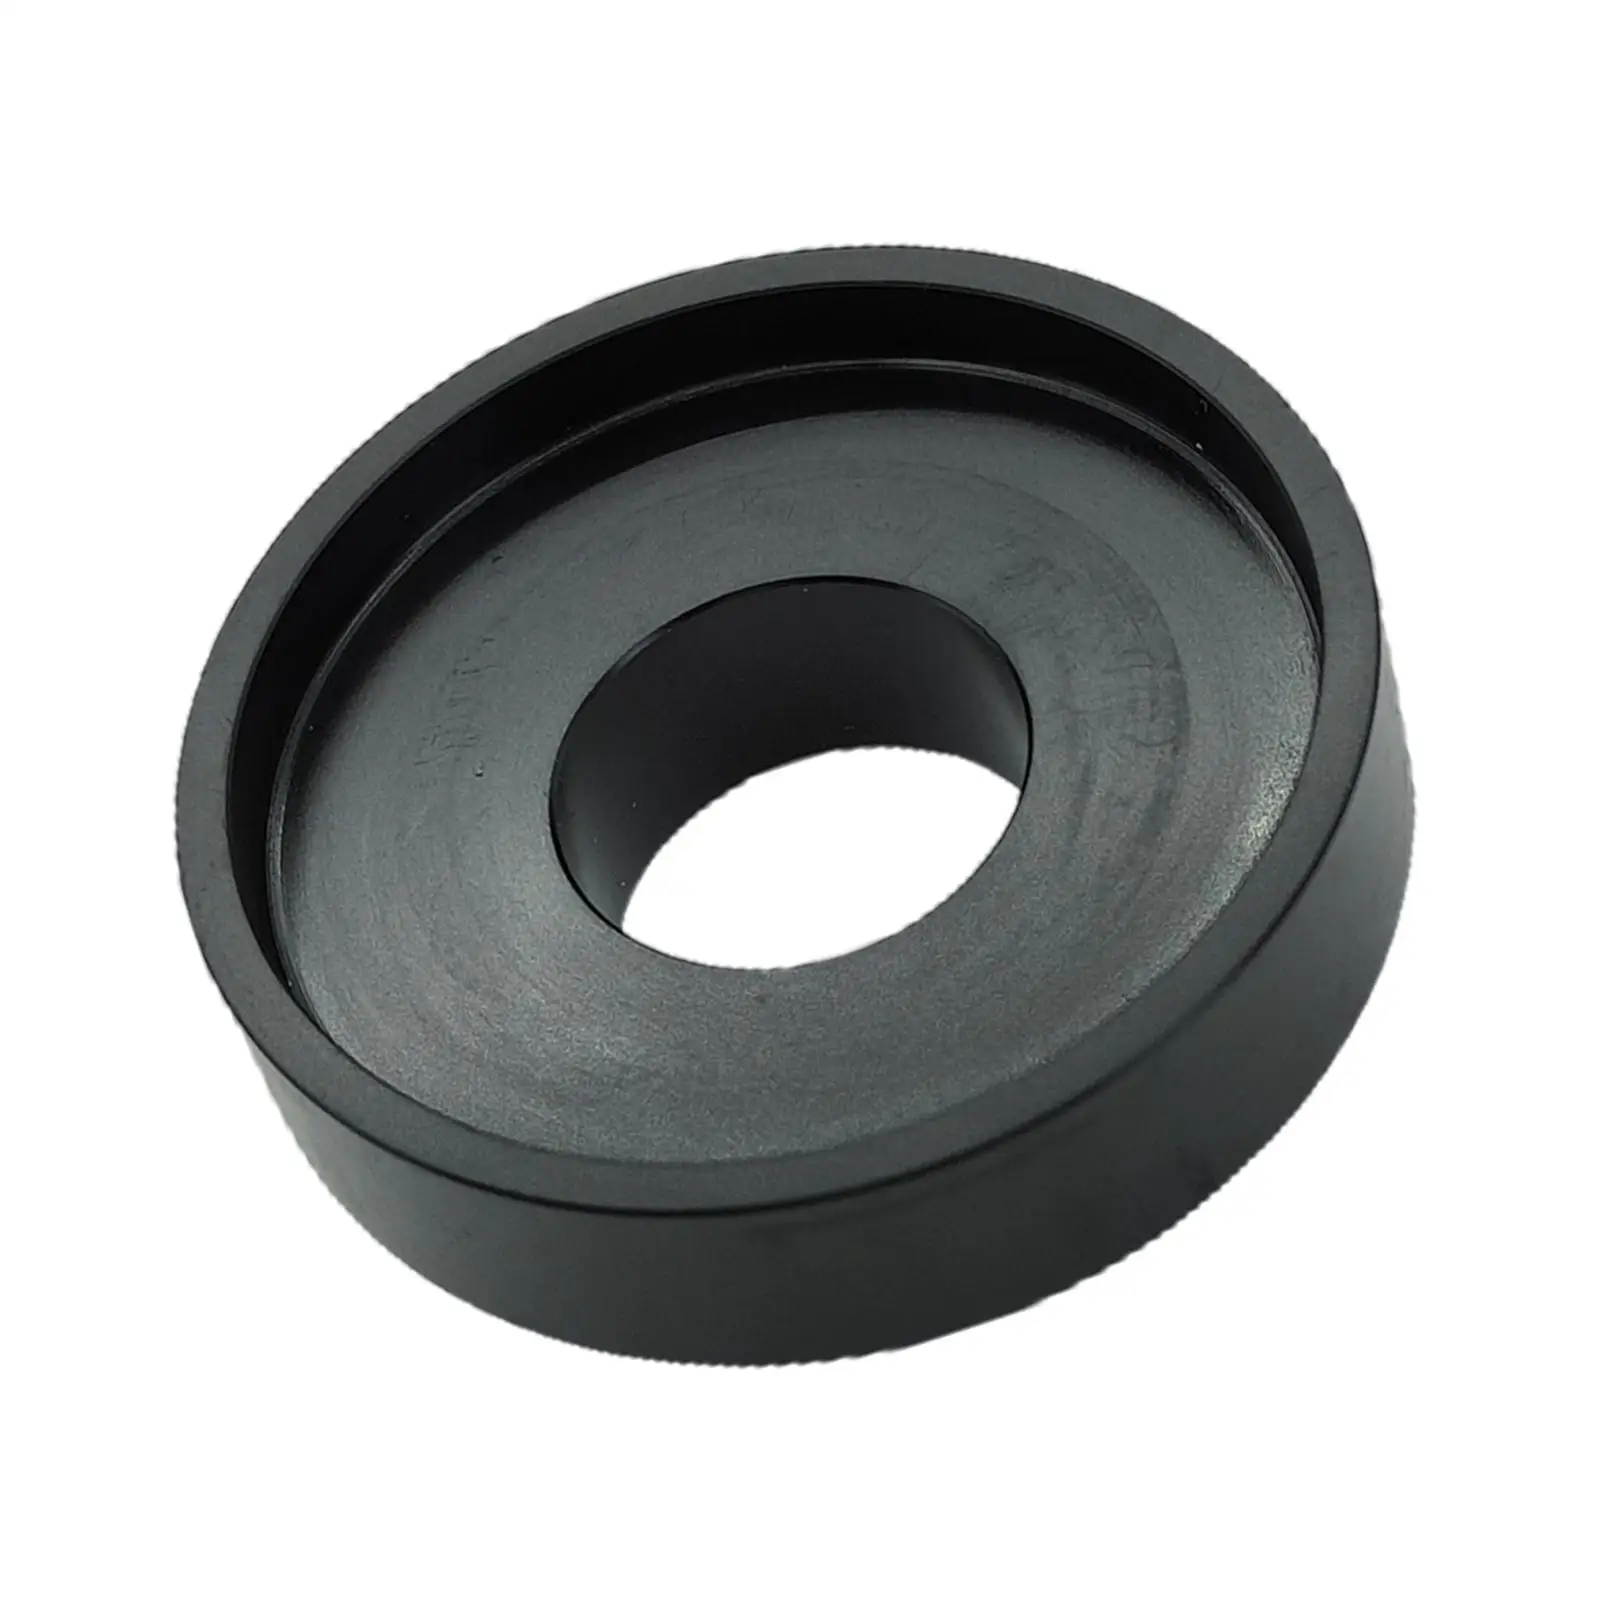 Interior Car Axle Bushing, Easy Installation Replacement for Yj TJ XJ